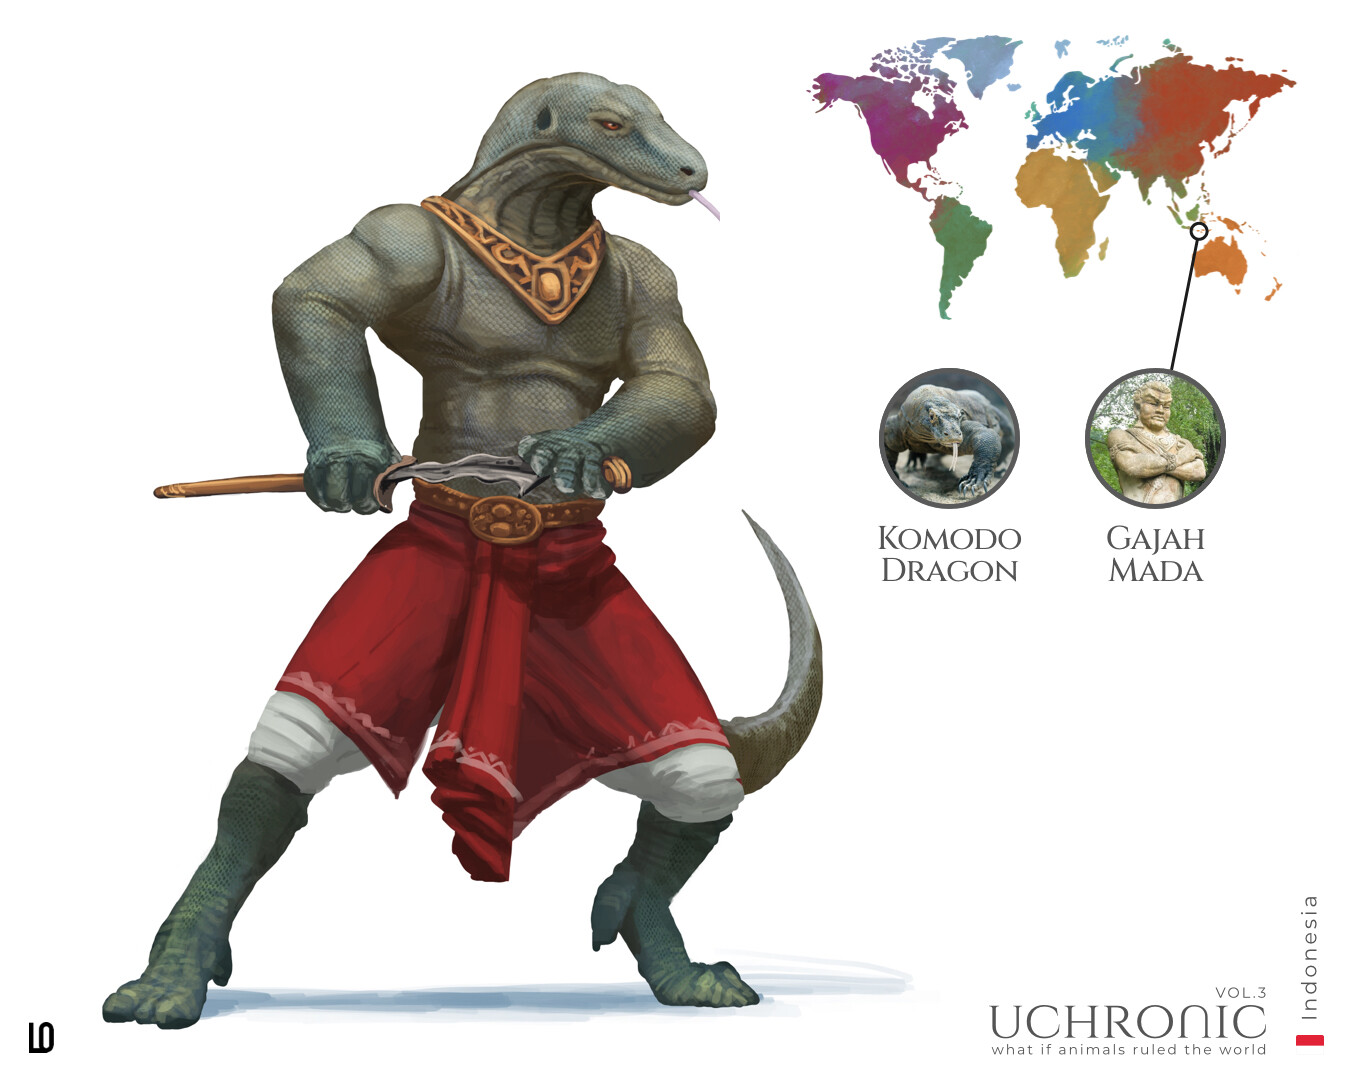 From Indonesia, a powerful warrior and military leader from the Javanese kingdom of Majapahit, Gajah Mada, in a world where only animal rules… will be a big and unique Komodo Dragon for sure!